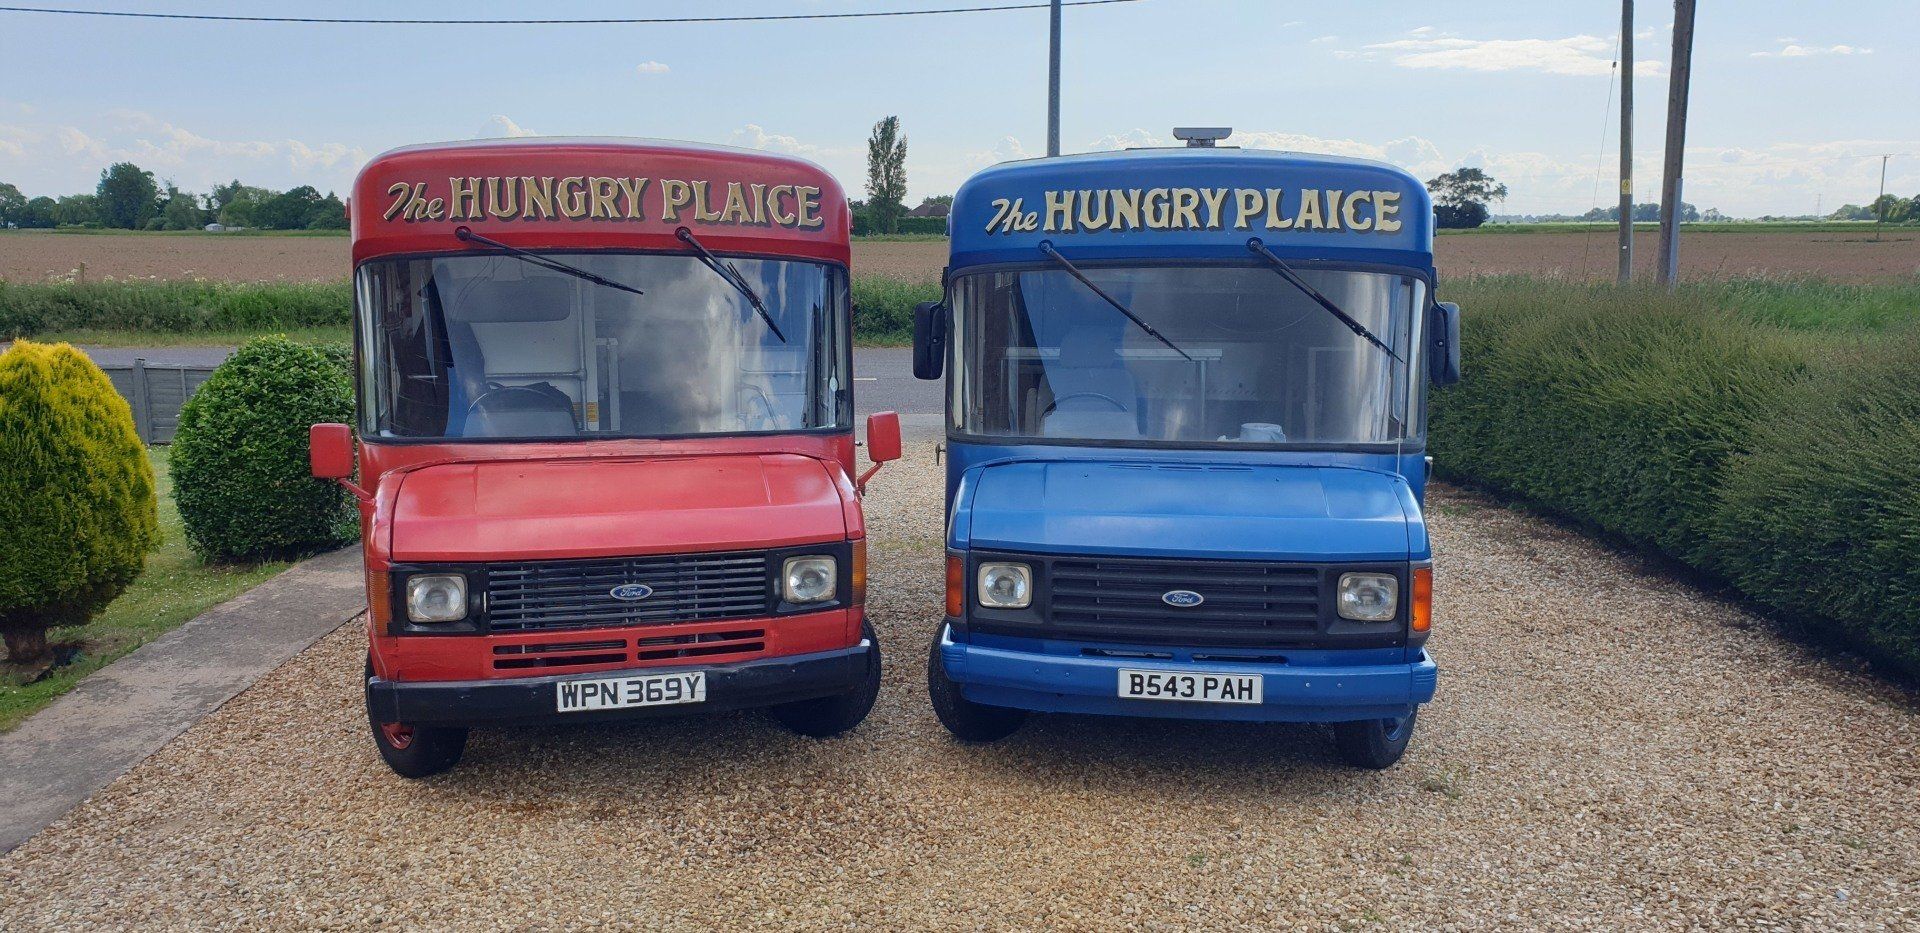 Vintage Fish And Chip Van Hire - Swindon - The Hungry Plaice - 